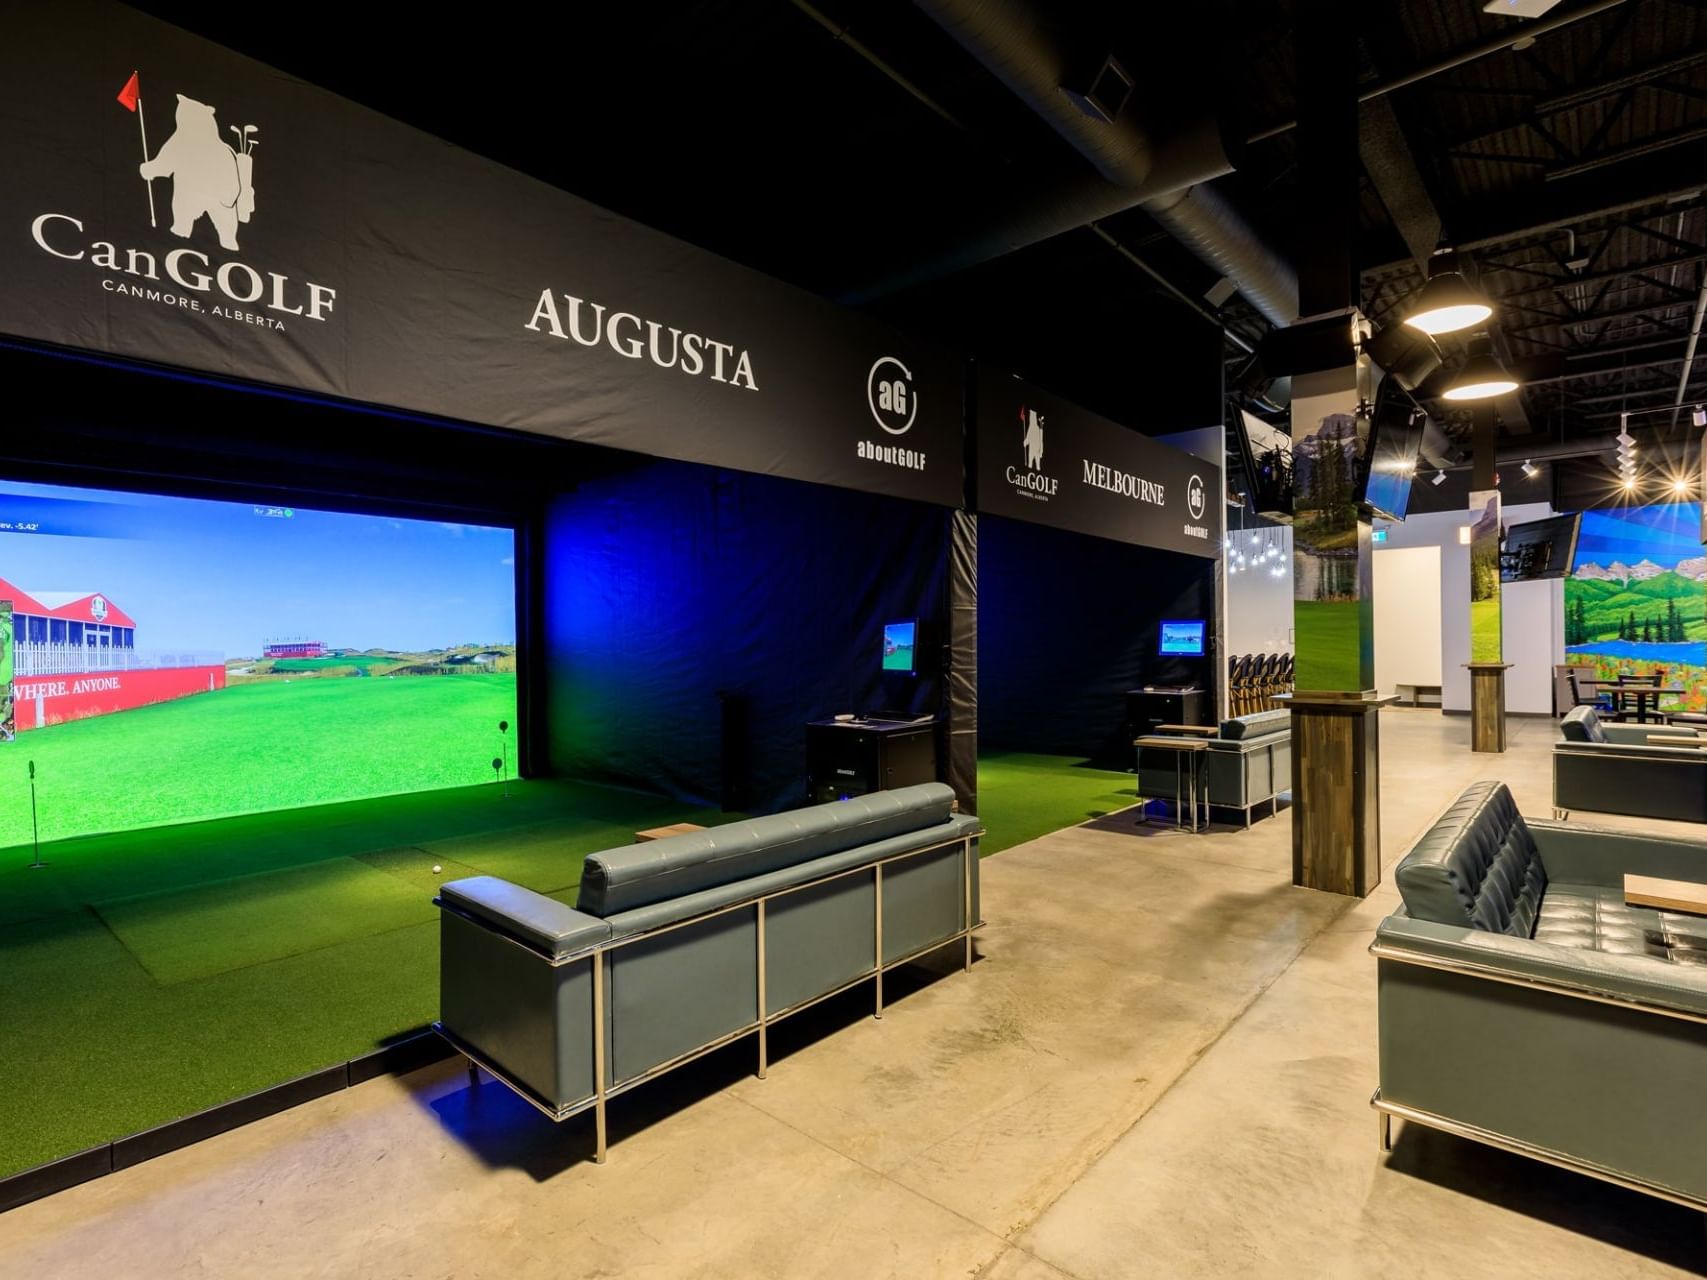 Interior of CanGolf game stall in The Malcolm Hotel